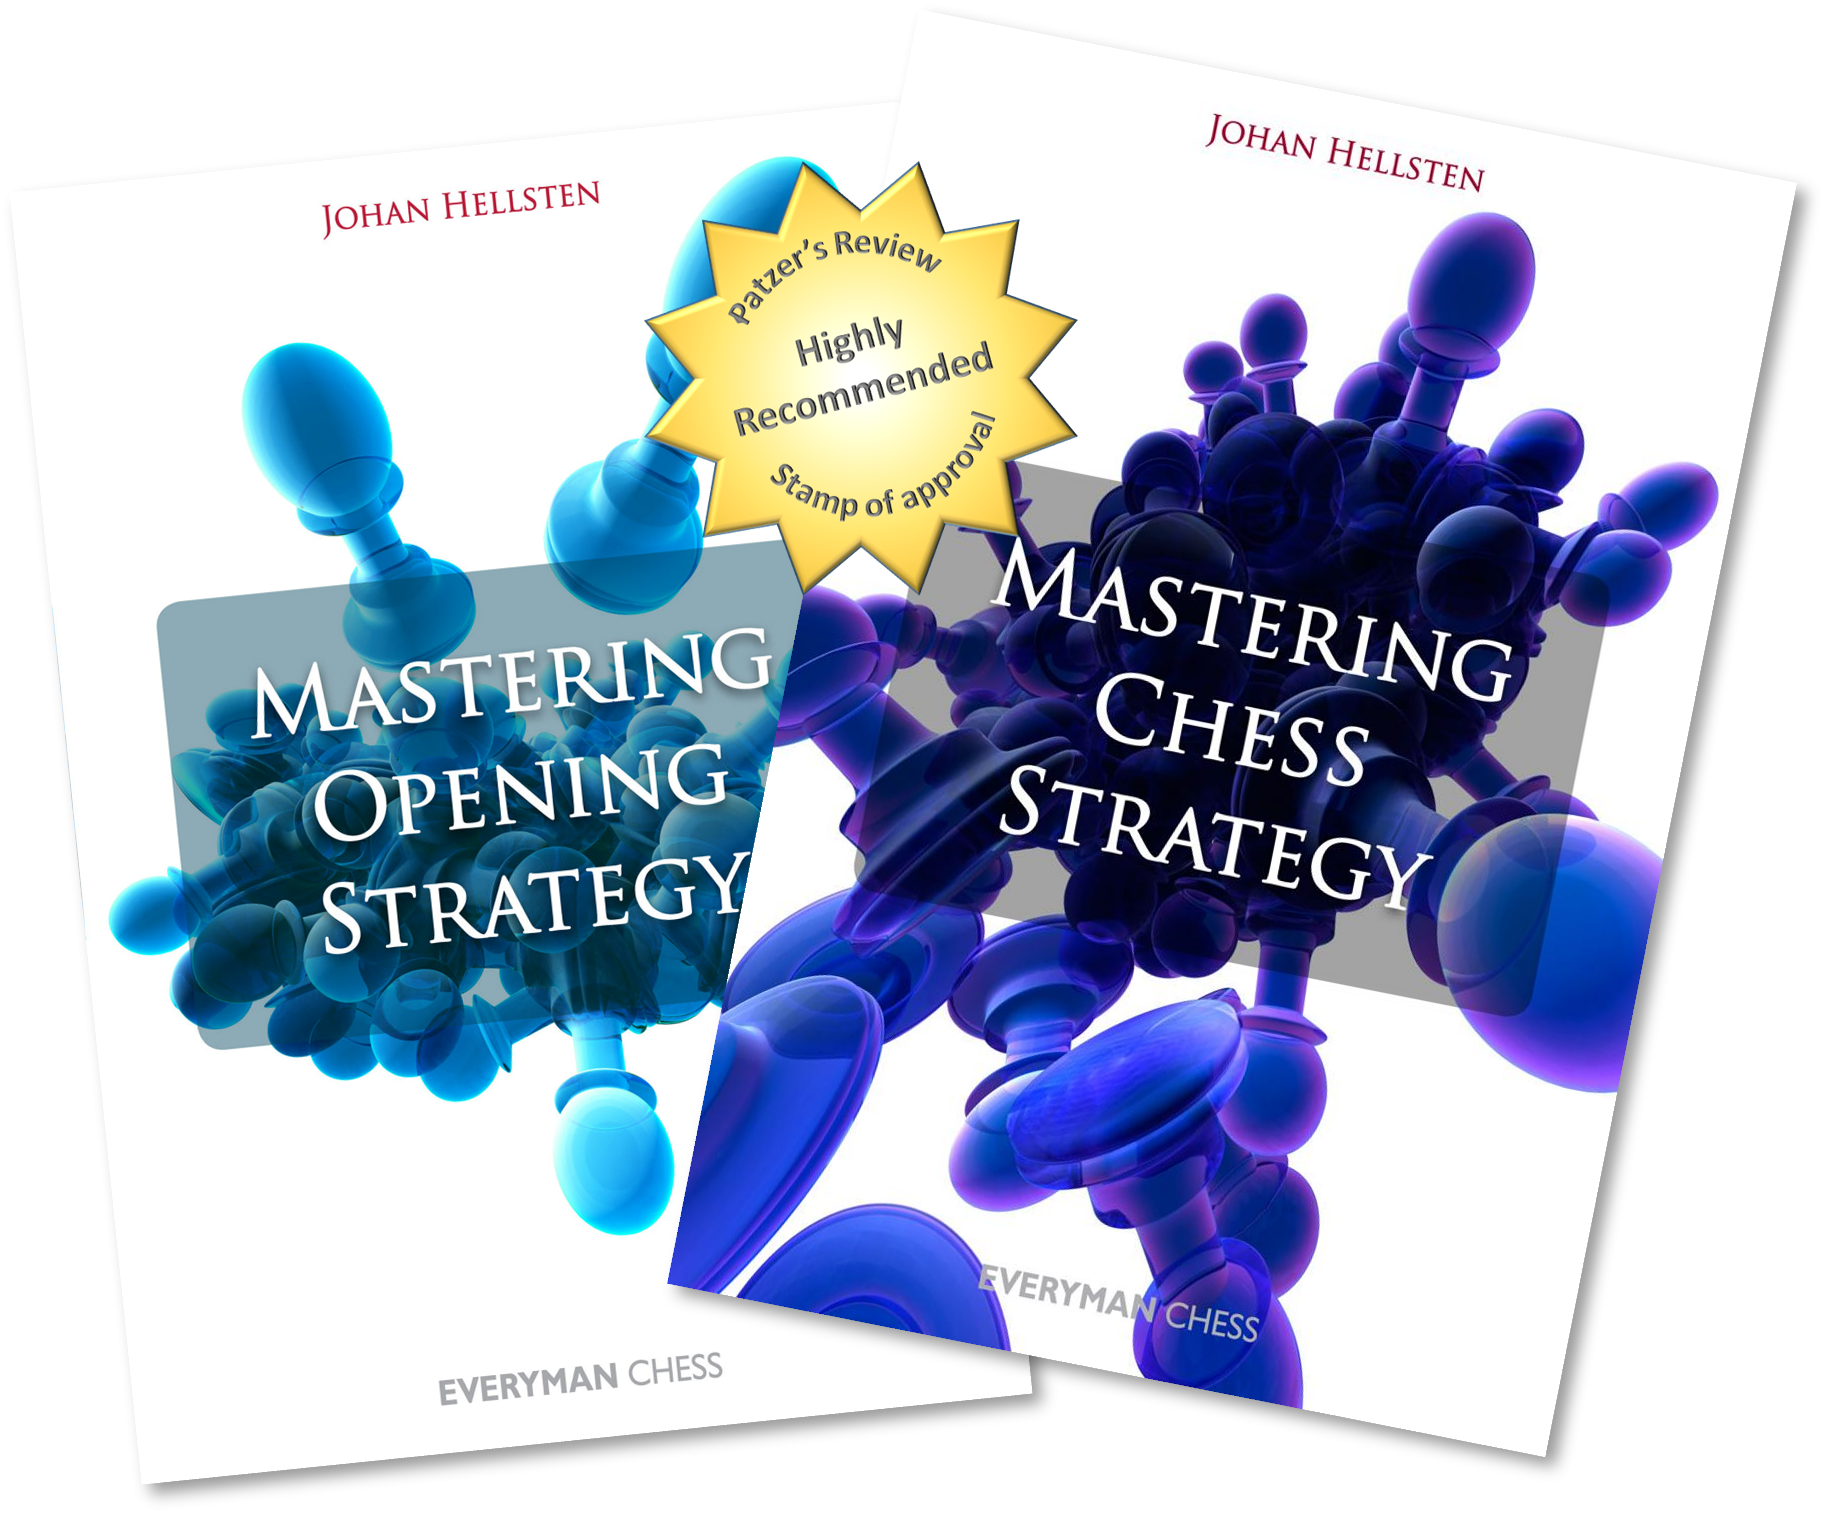 Chessable - Chess Openings, Endgames, Tactics & Strategy